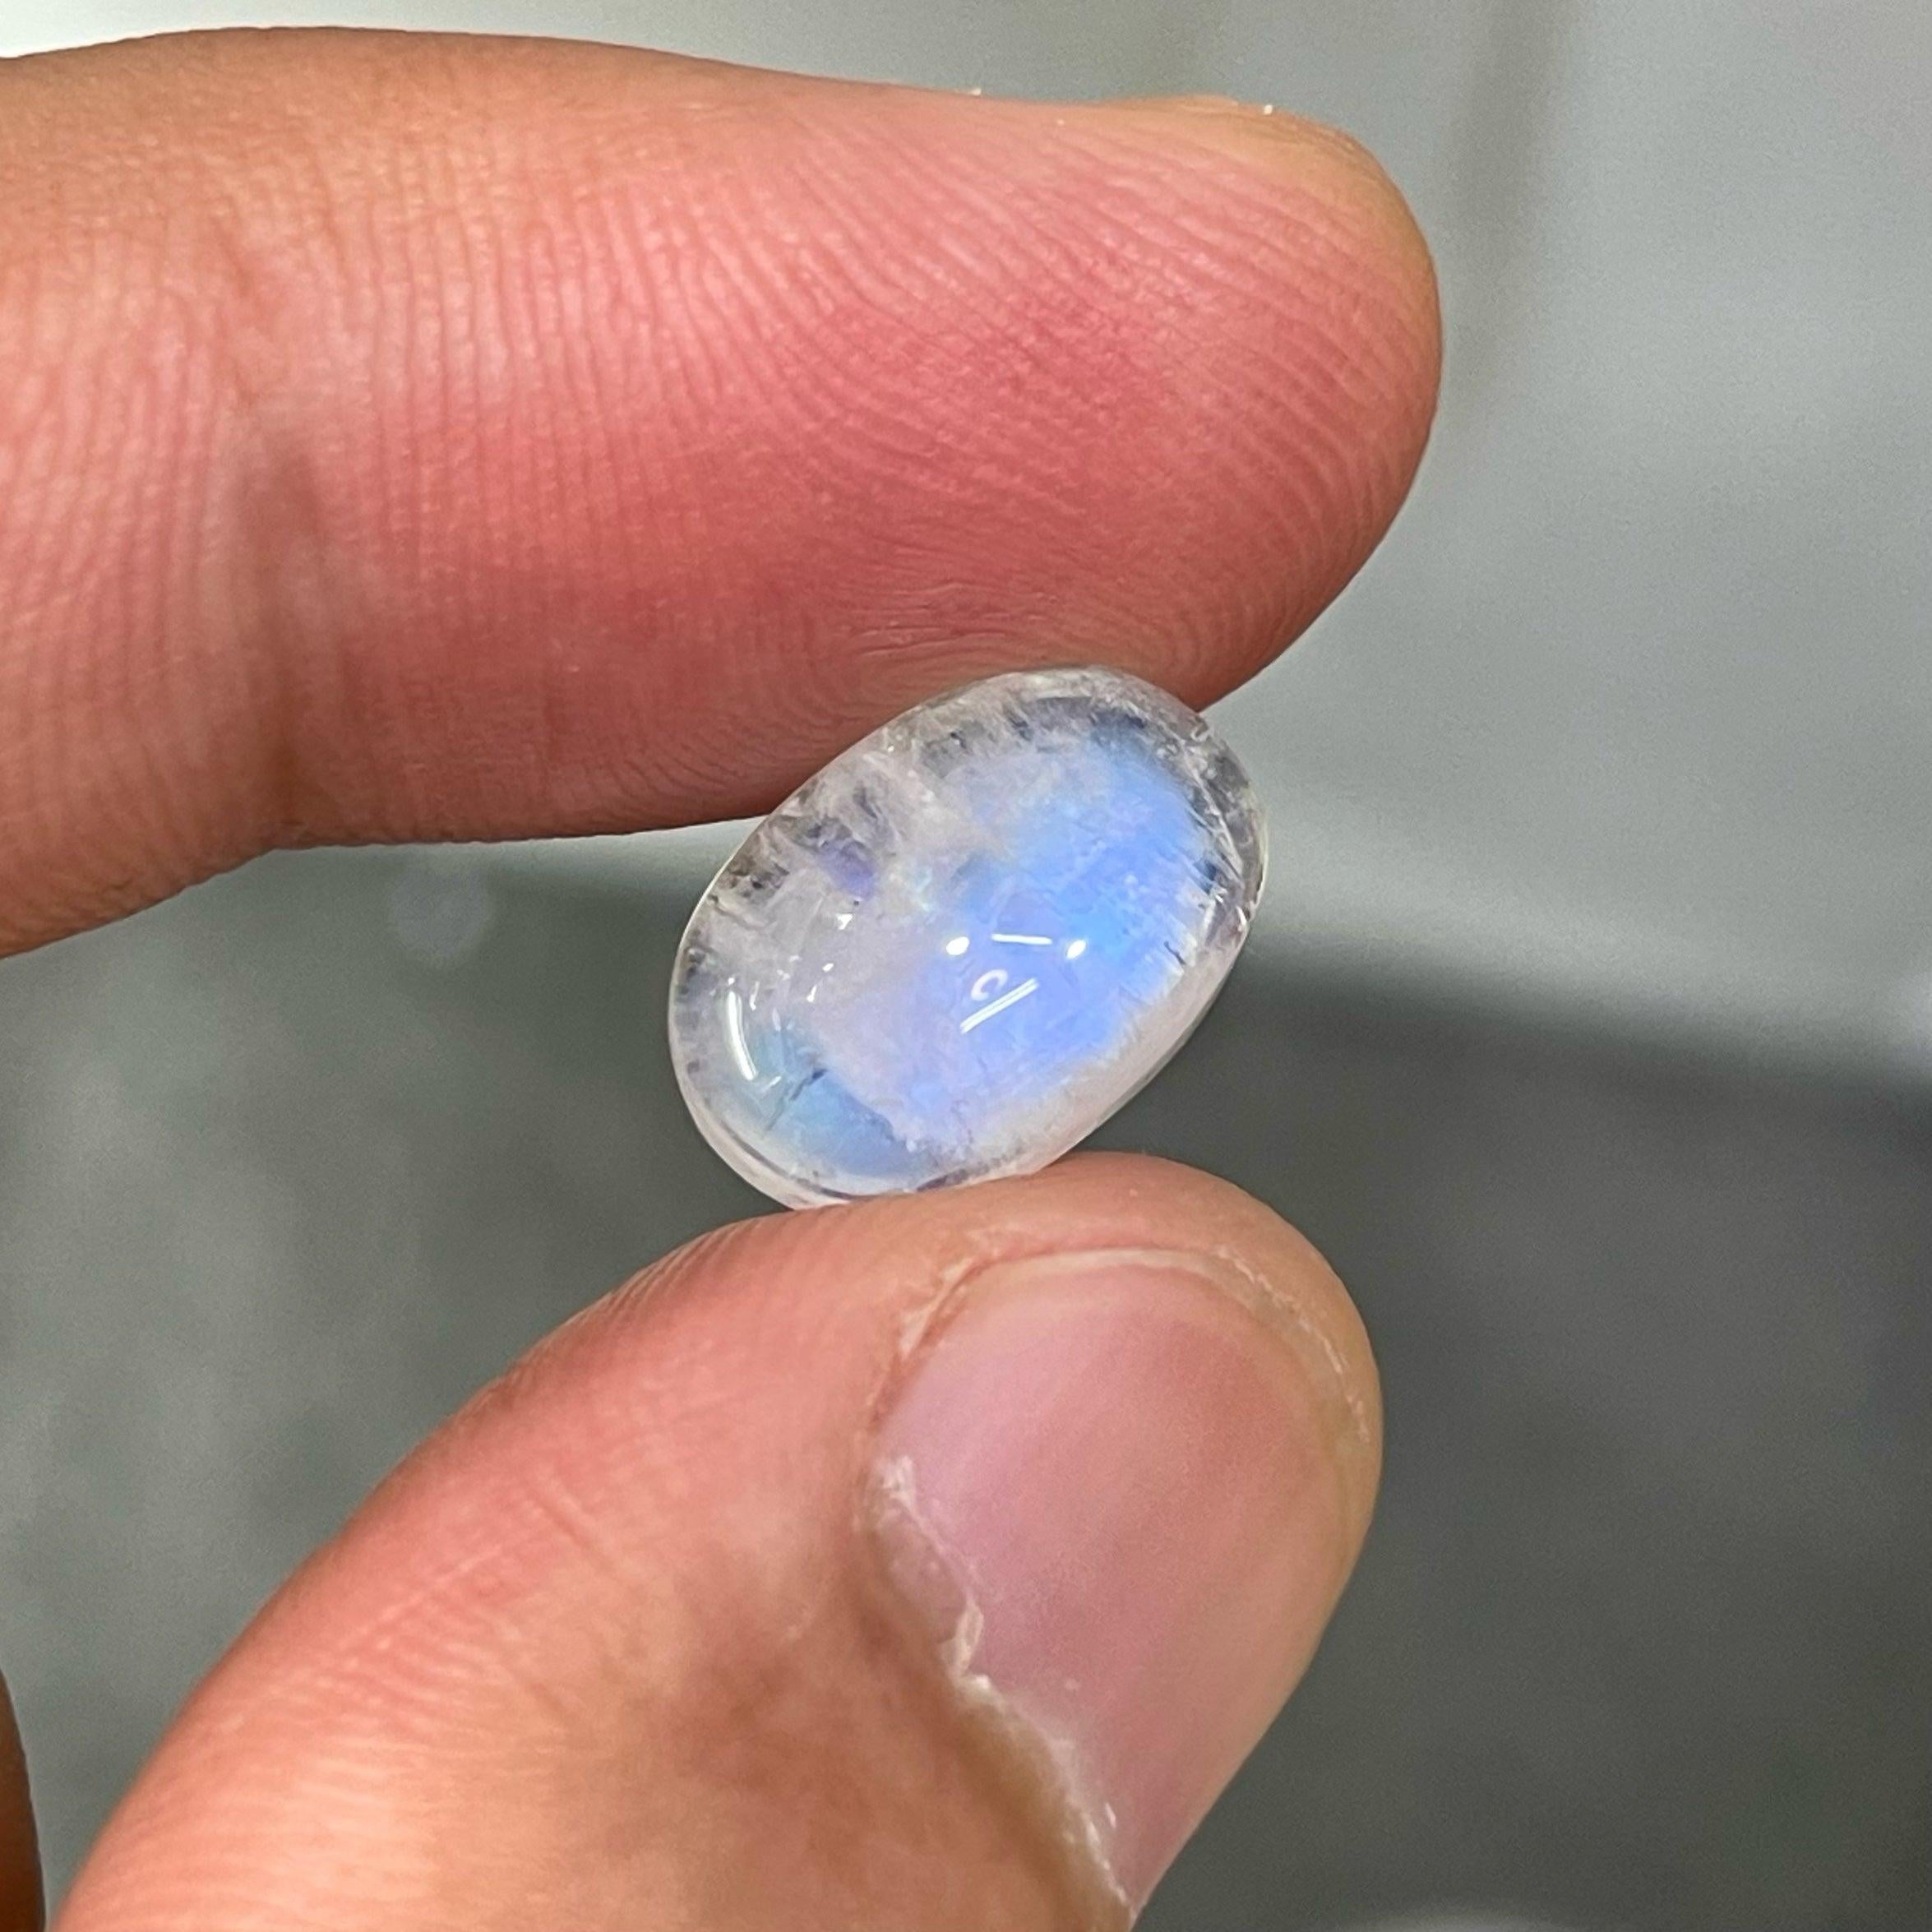 Beautiful Natural Loose Moonstone Gemstone, available for sale at wholesale price, natural high-quality 5.15 carats Diaphaneity Translucent clarity, certified Moonstone from India.

Product Information:
GEMSTONE NAME: Beautiful Natural Loose